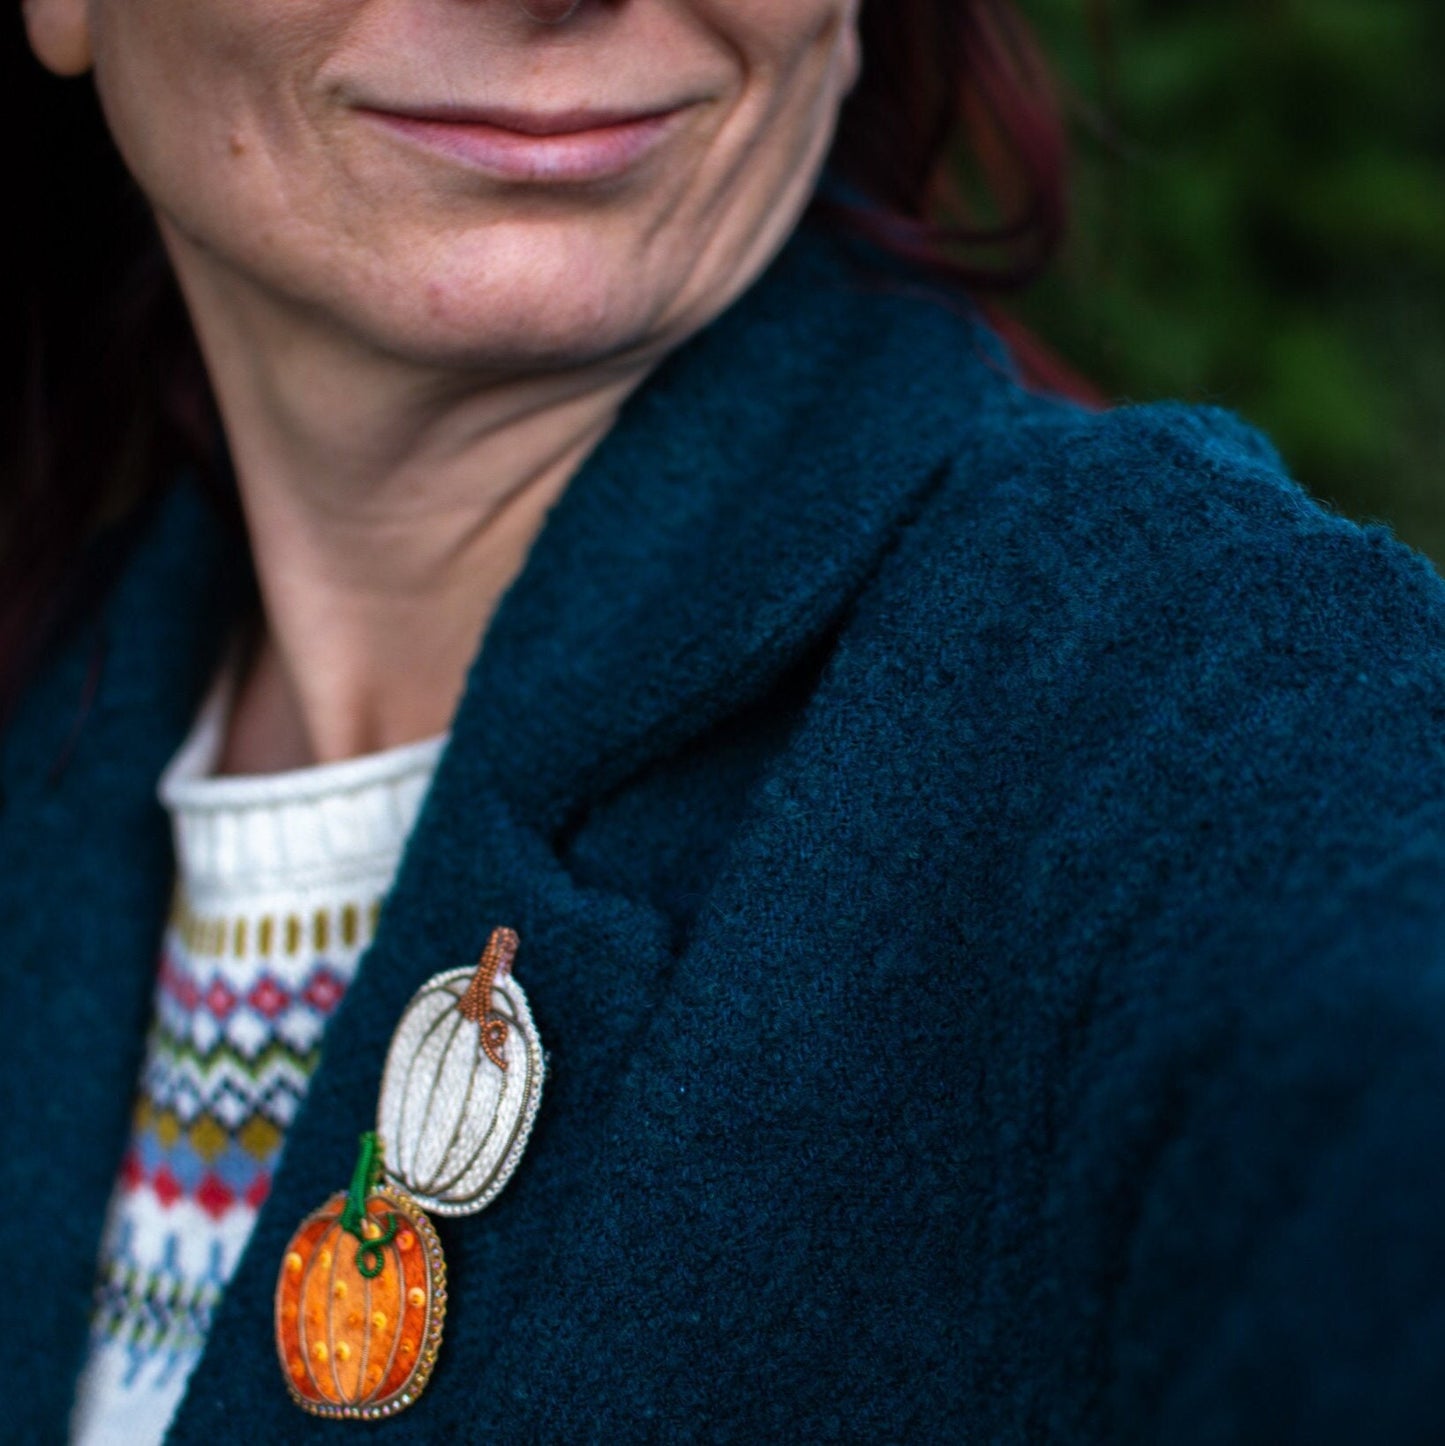 Embroidered Pumpkin Brooches worn on a coatcoa